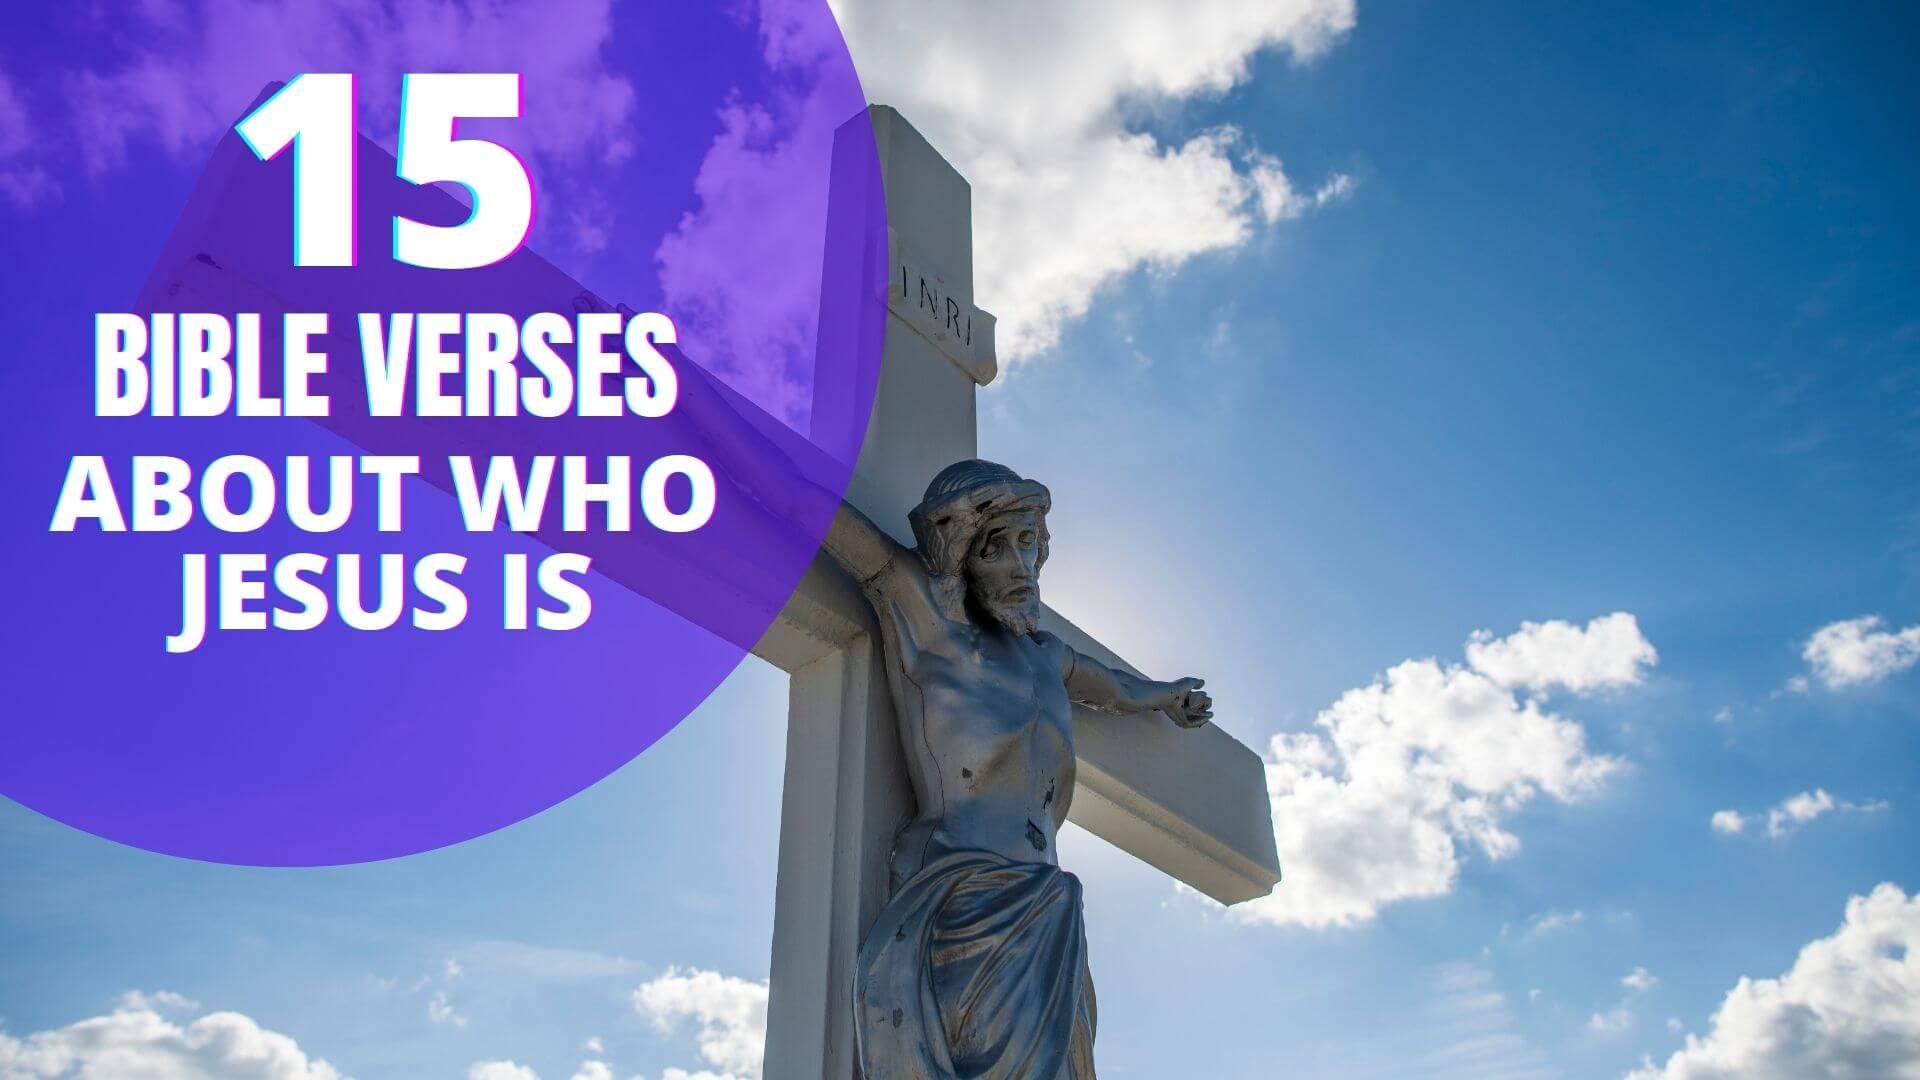 Bible verses about who Jesus is